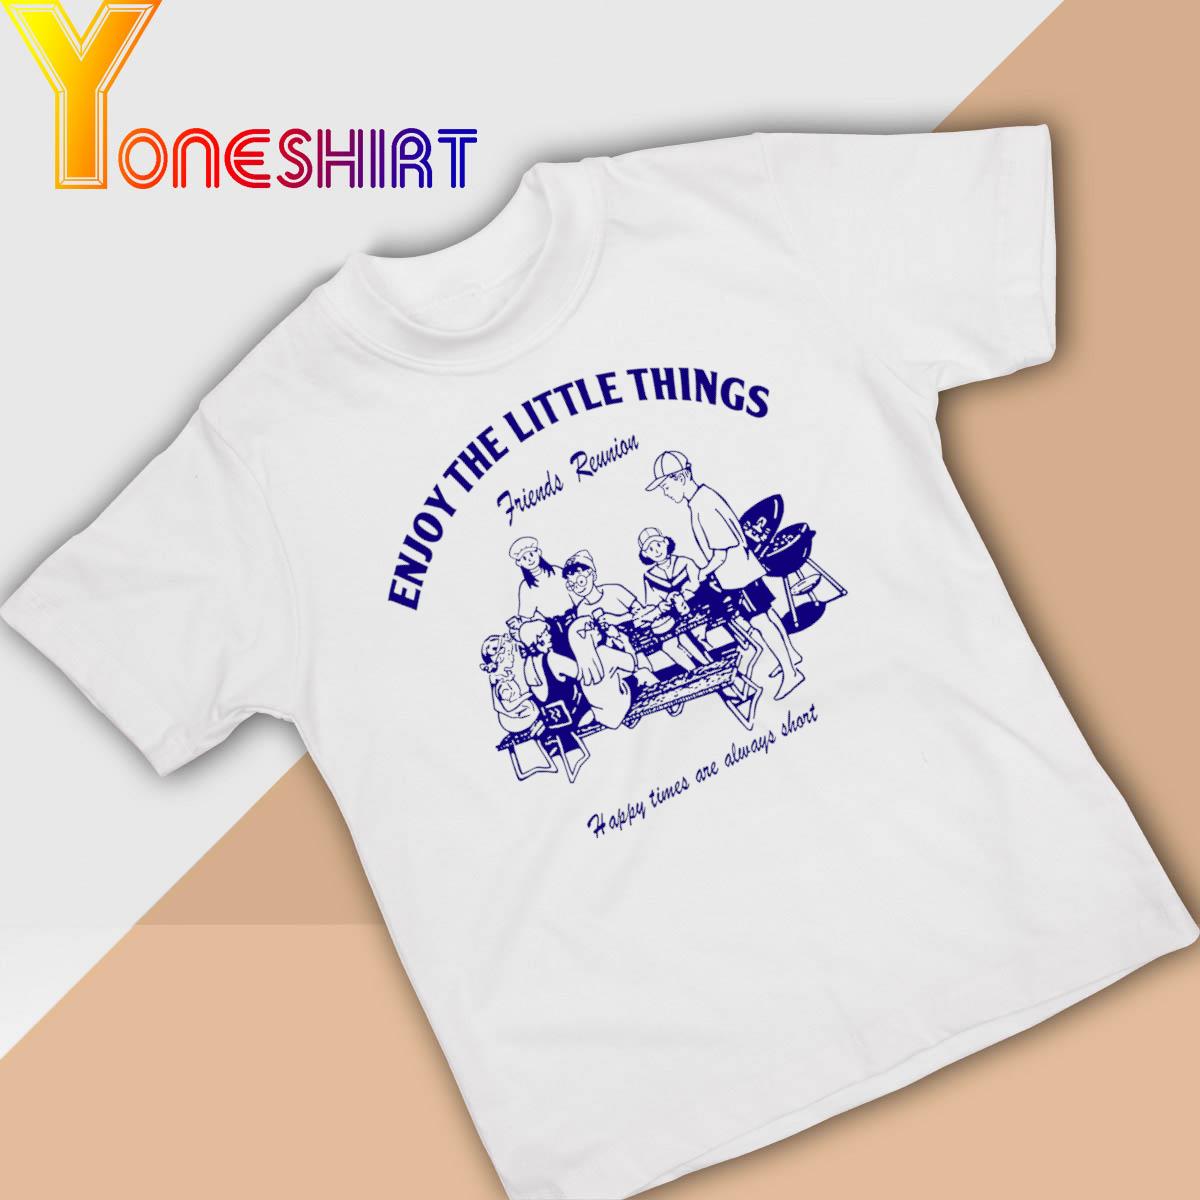 Enjoy the Little Things Friends Reunion Happy Times are always Short shirt